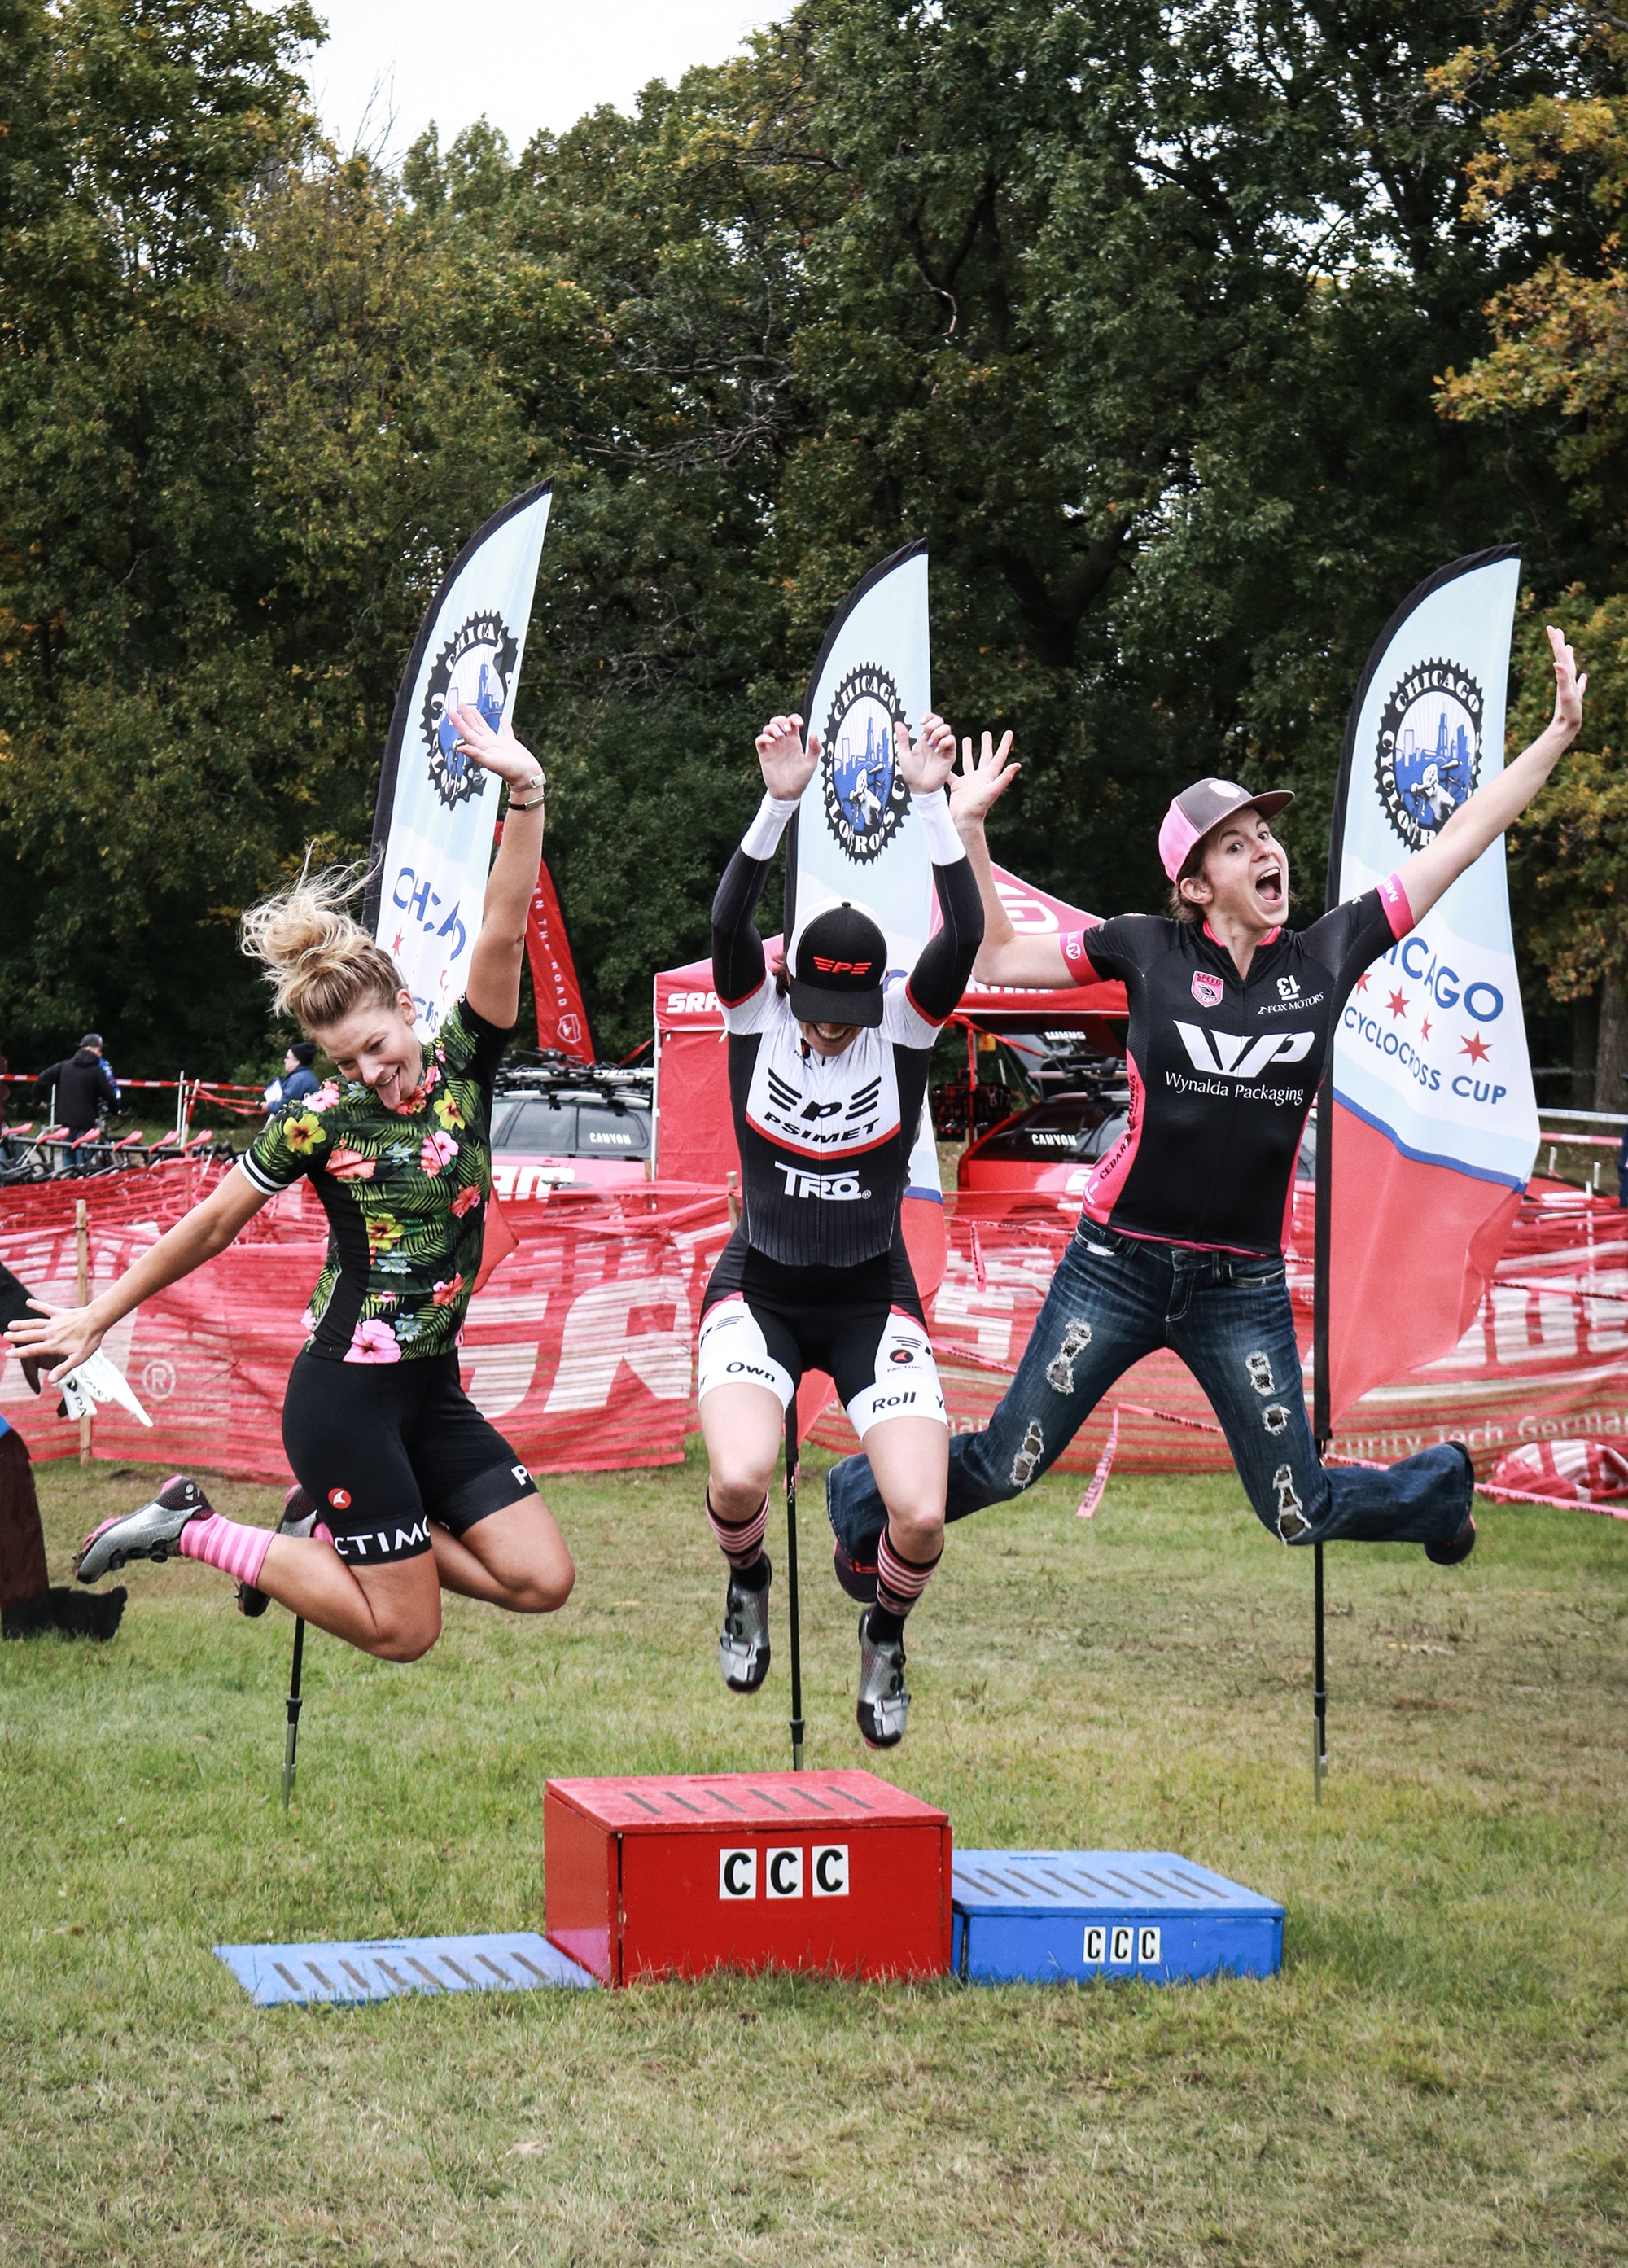 Women jumping from podium